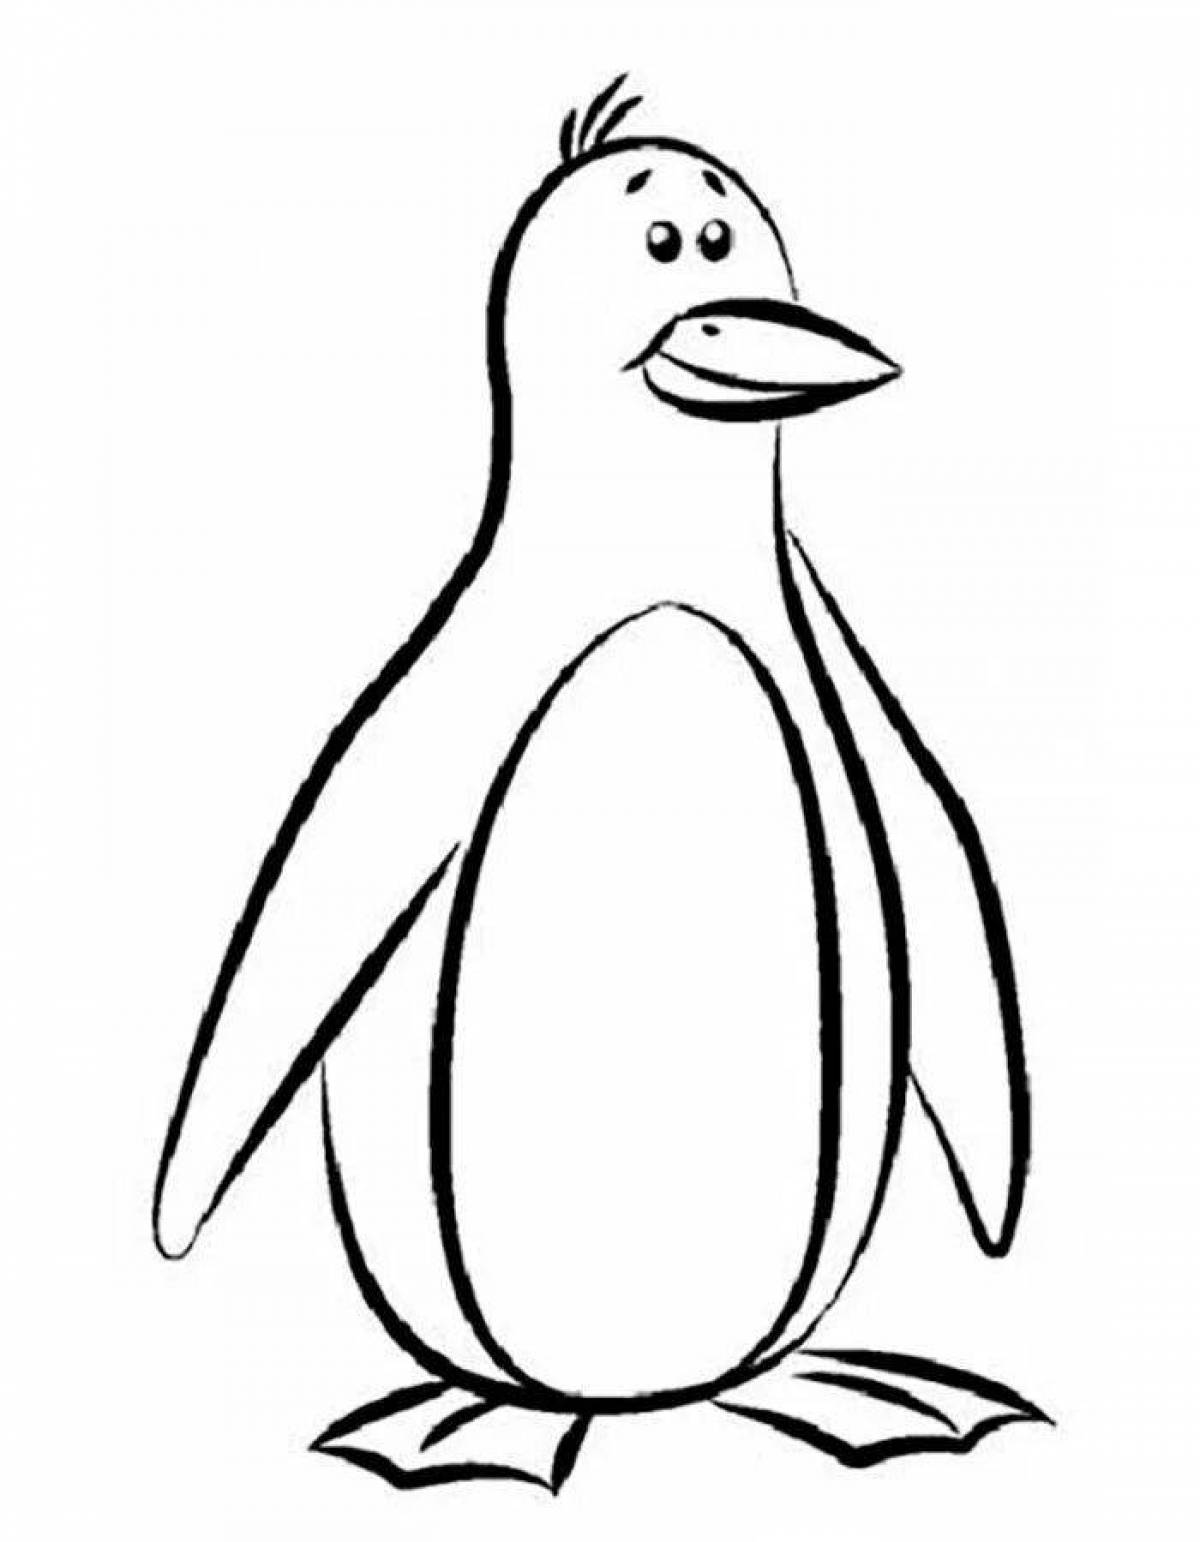 Delightful drawing of a penguin